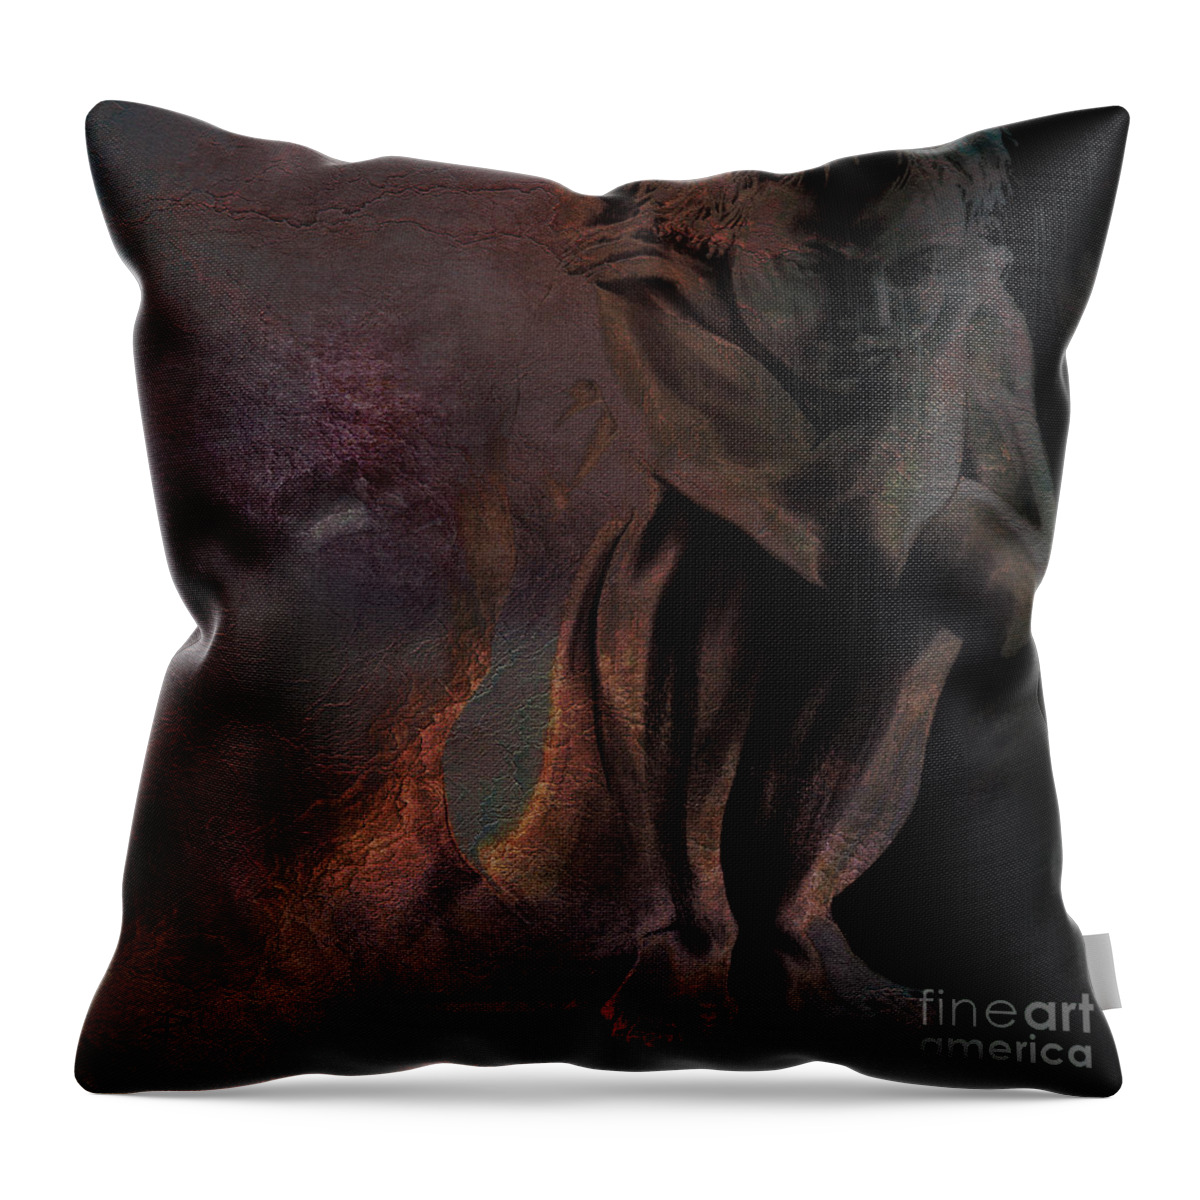 Quiescent Throw Pillow featuring the drawing Quiescent II. textured. sq by Paul Davenport